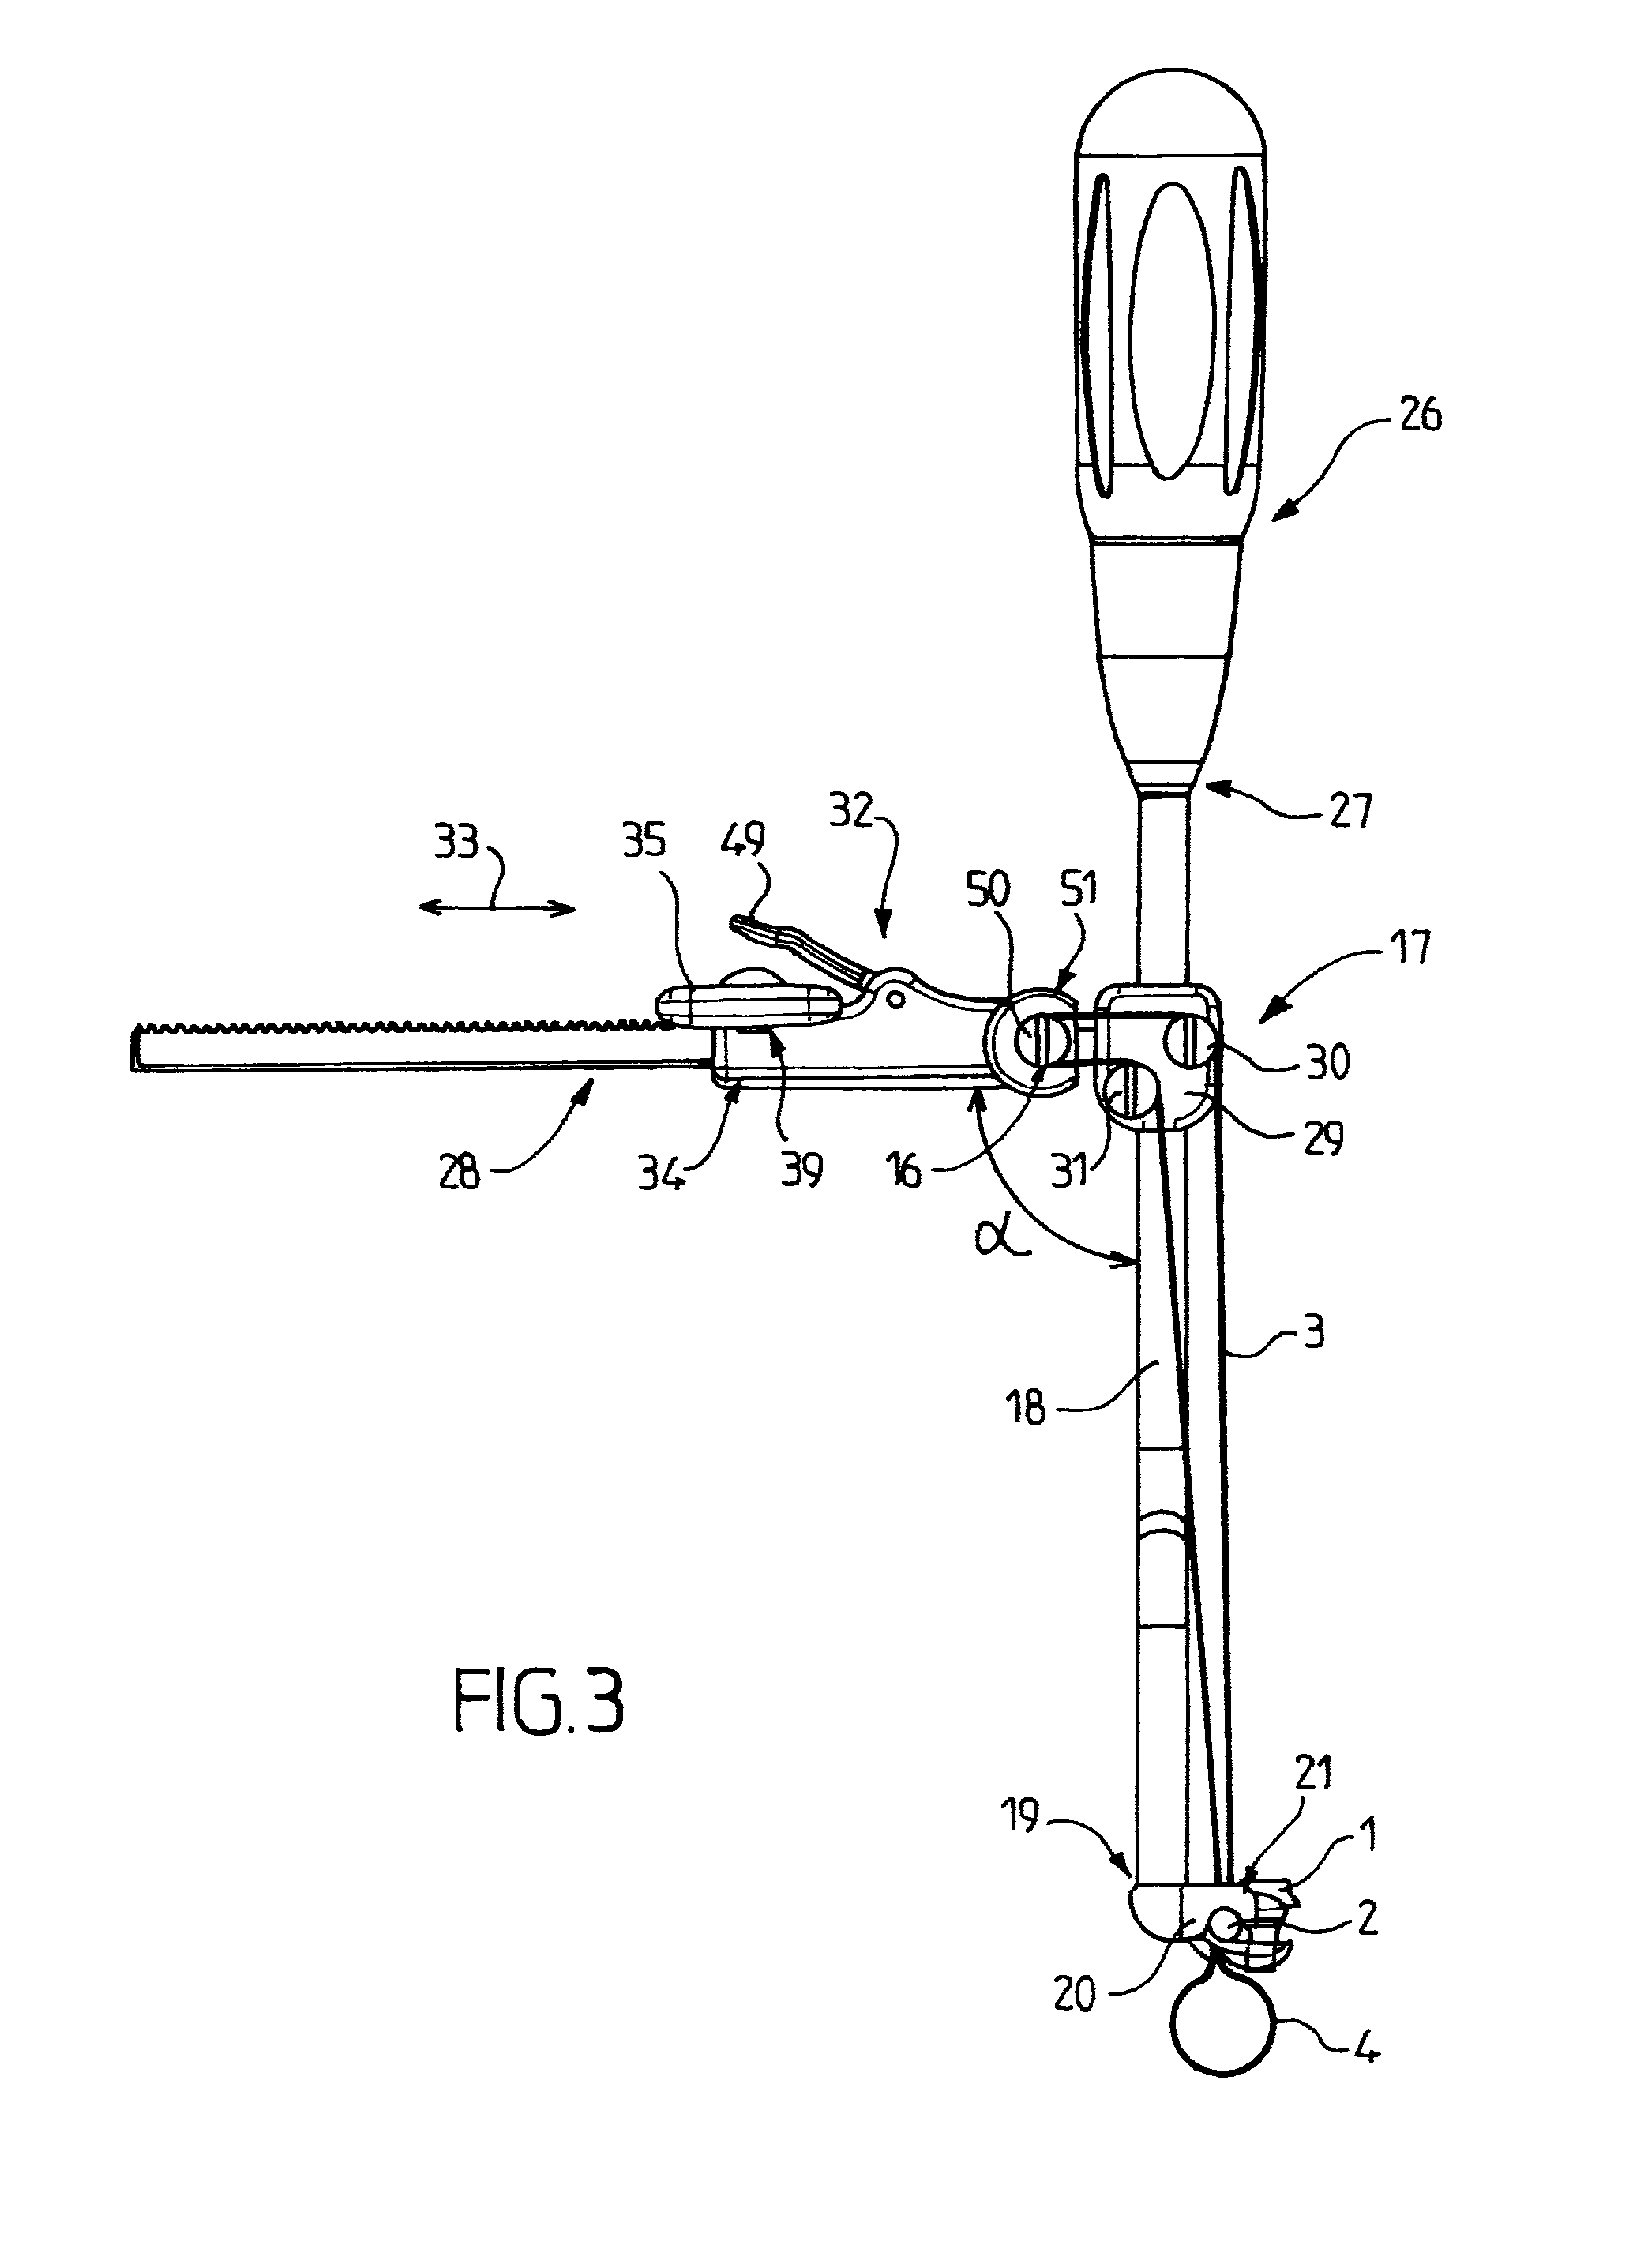 Device for tensioning a flexible band